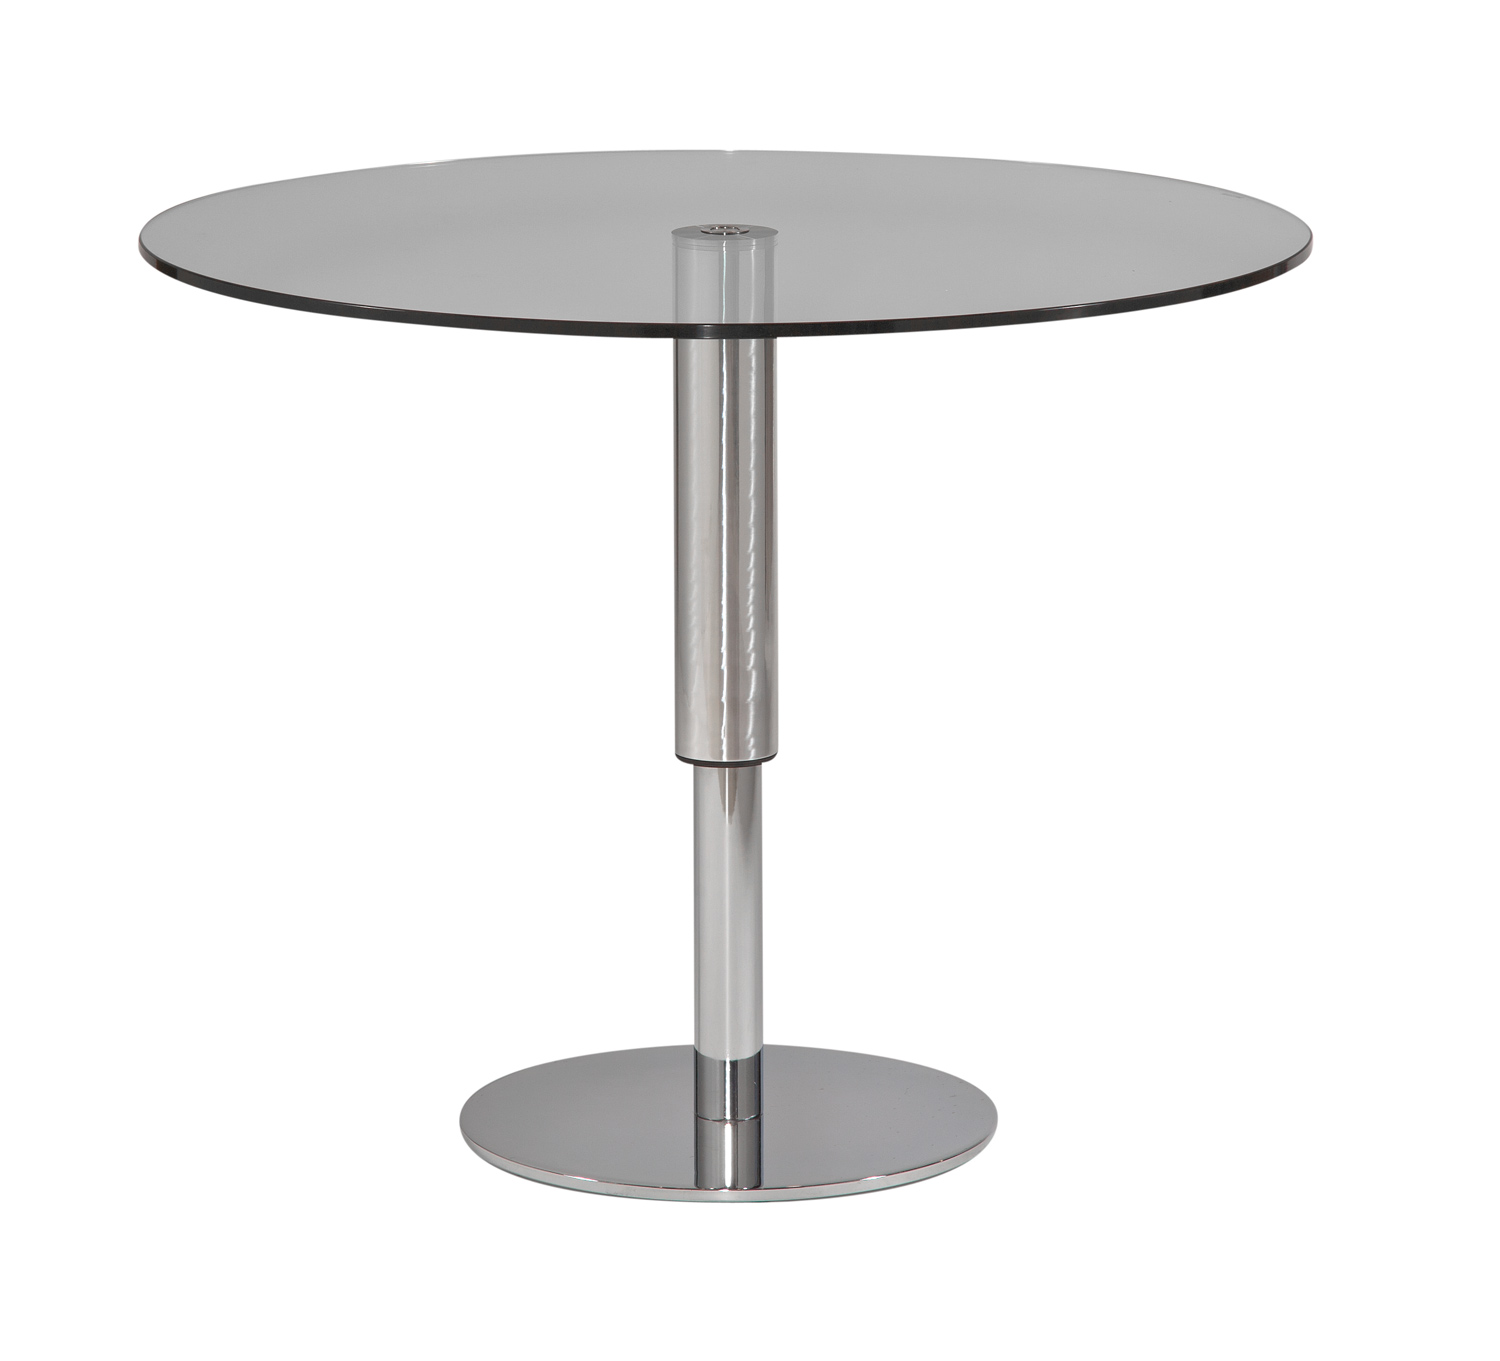 Chintaly Imports 8129 Round Hi-Low Dining Table - Glass-Aluminum-Chrome